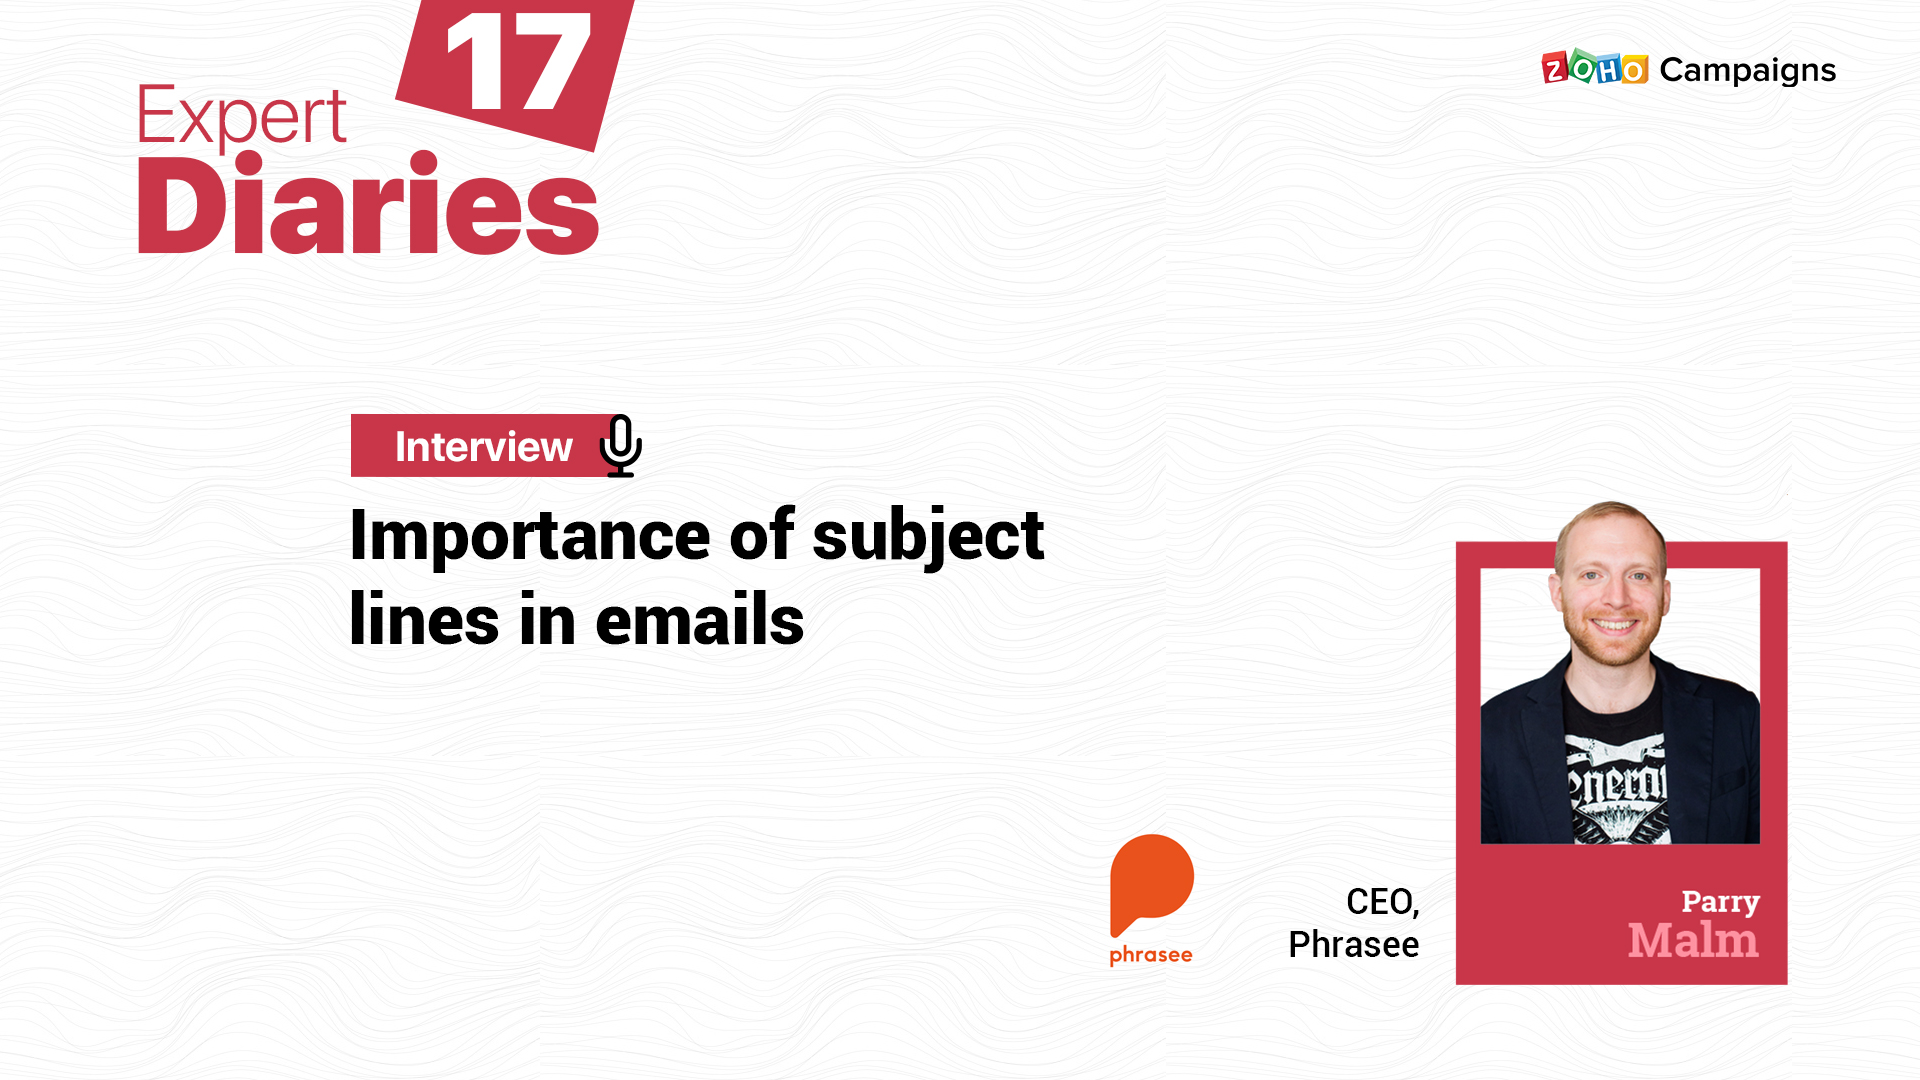 Importance of subject lines in emails